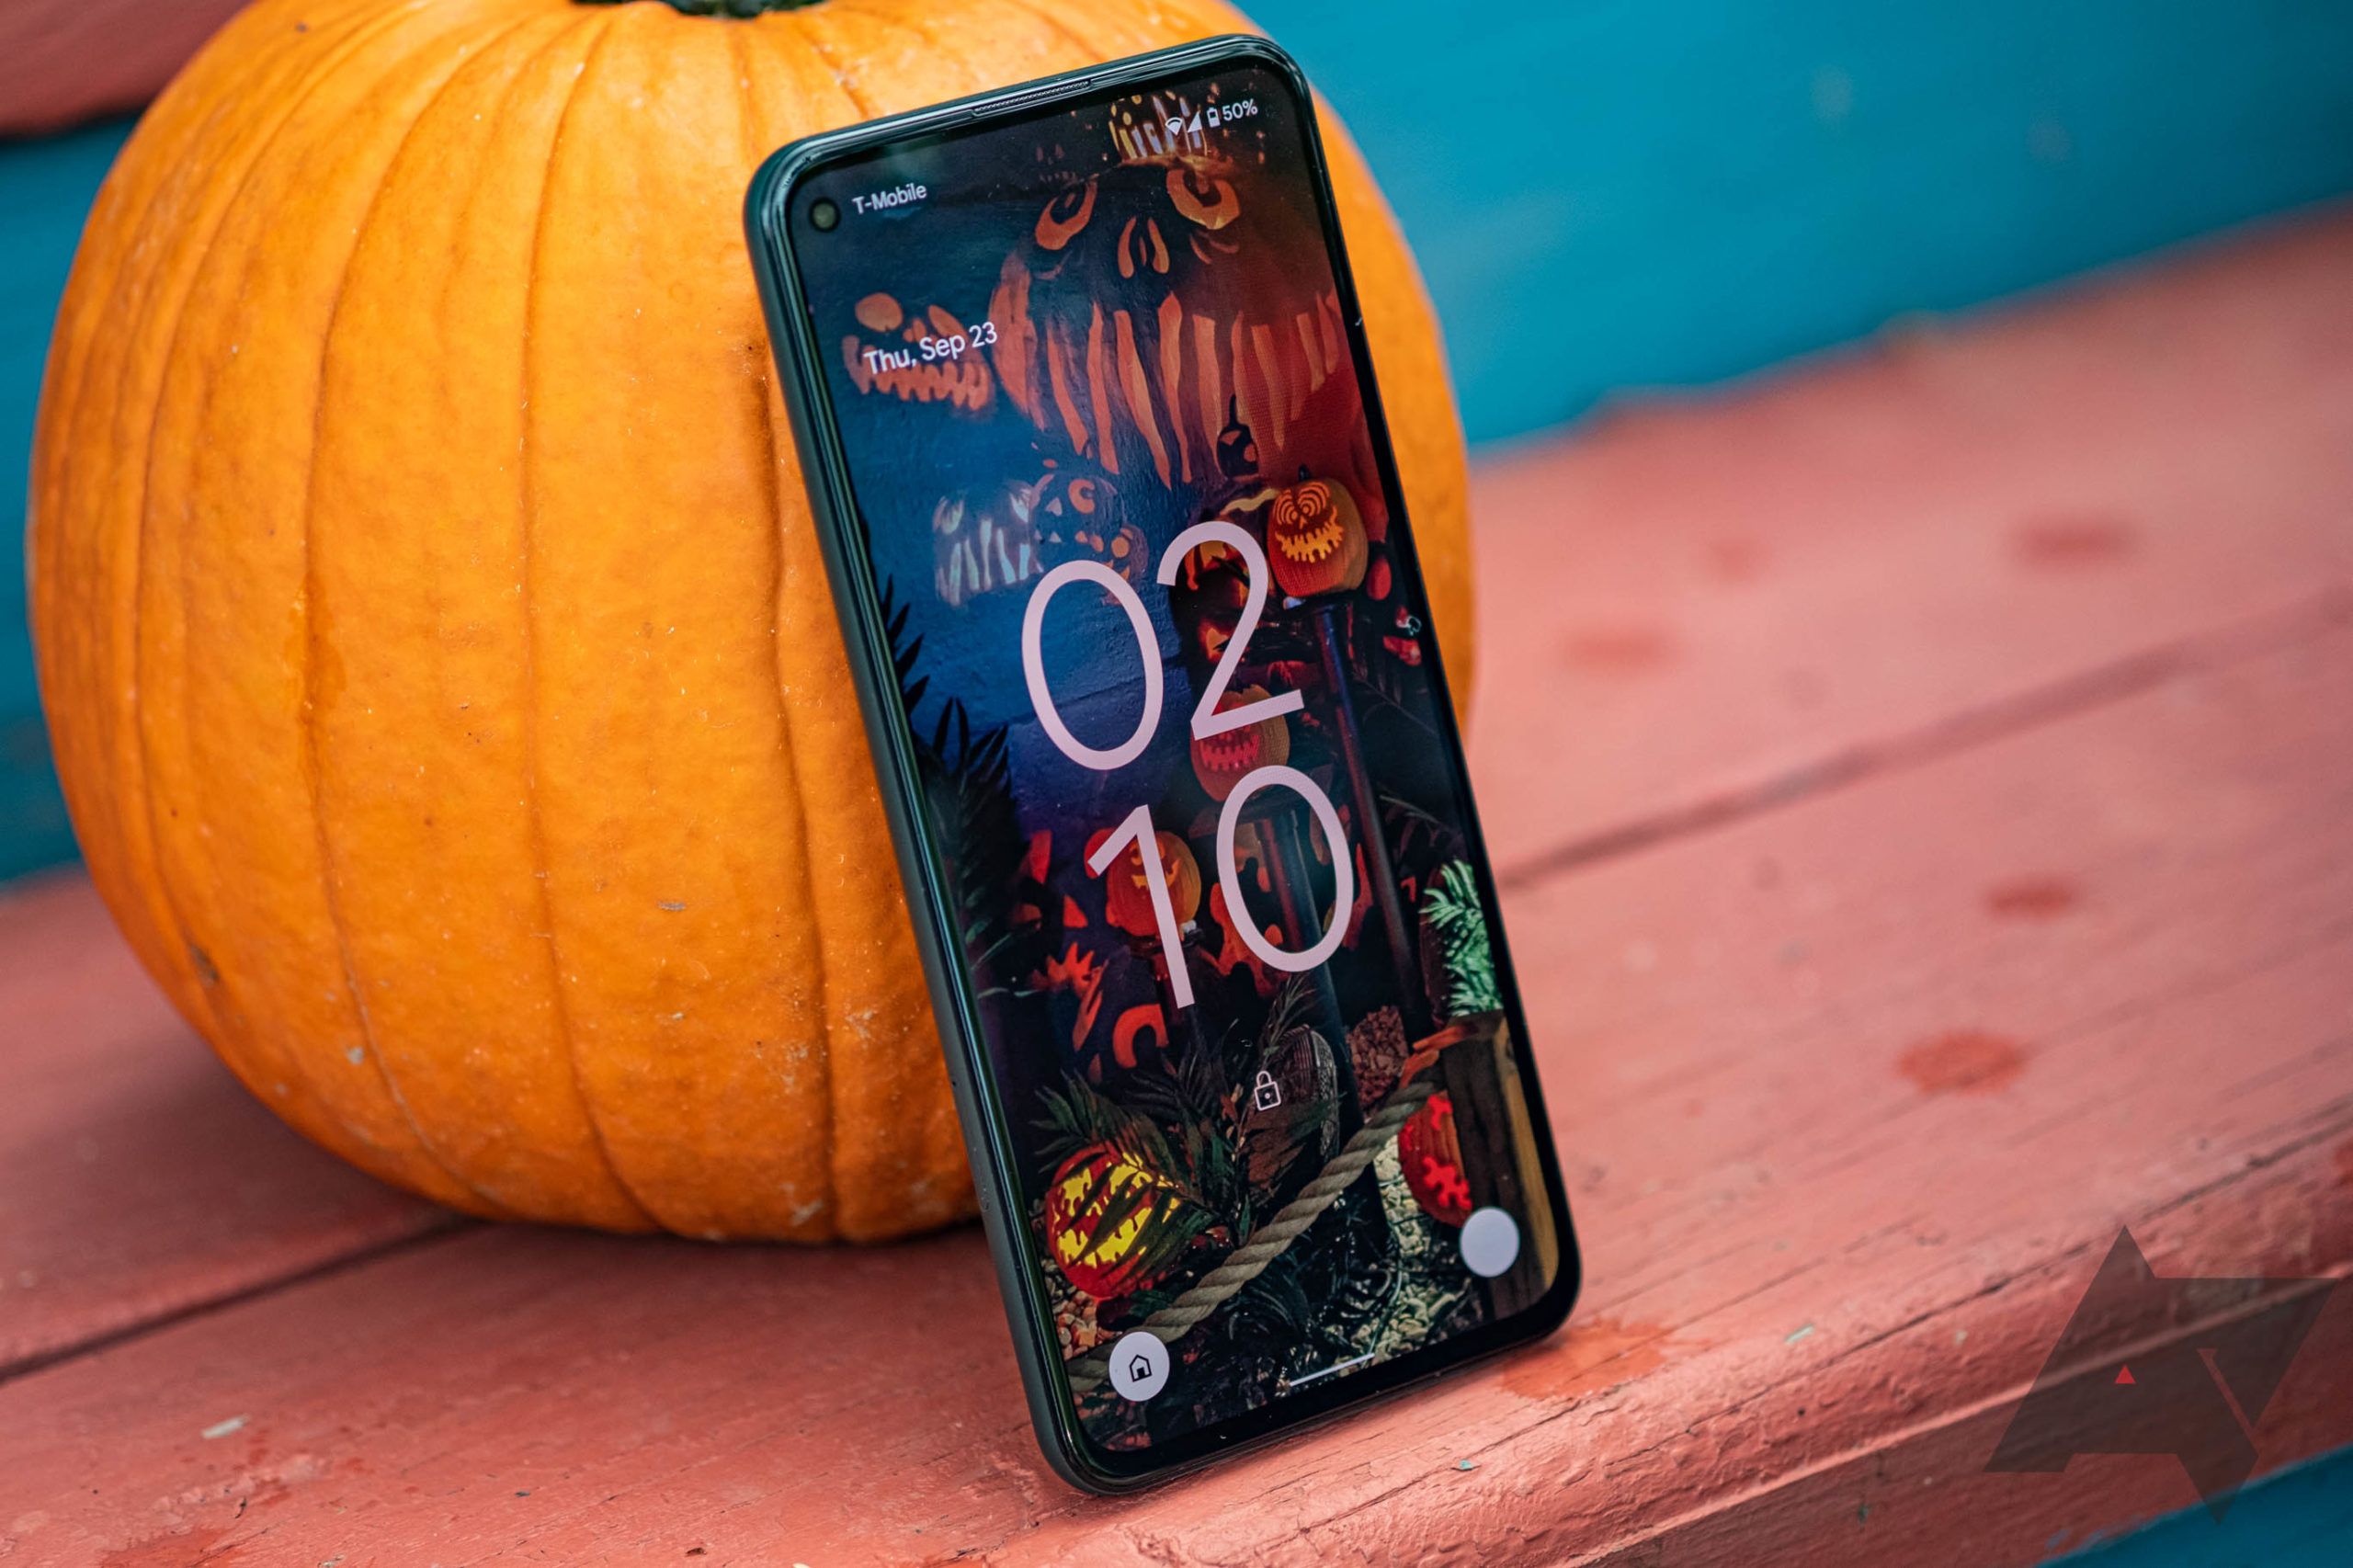 https://www.androidpolice.com/wordpress/wp-content/uploads/2022/09/23/Pixel-5a-Android-12-Halloween-theme-scaled.jpg